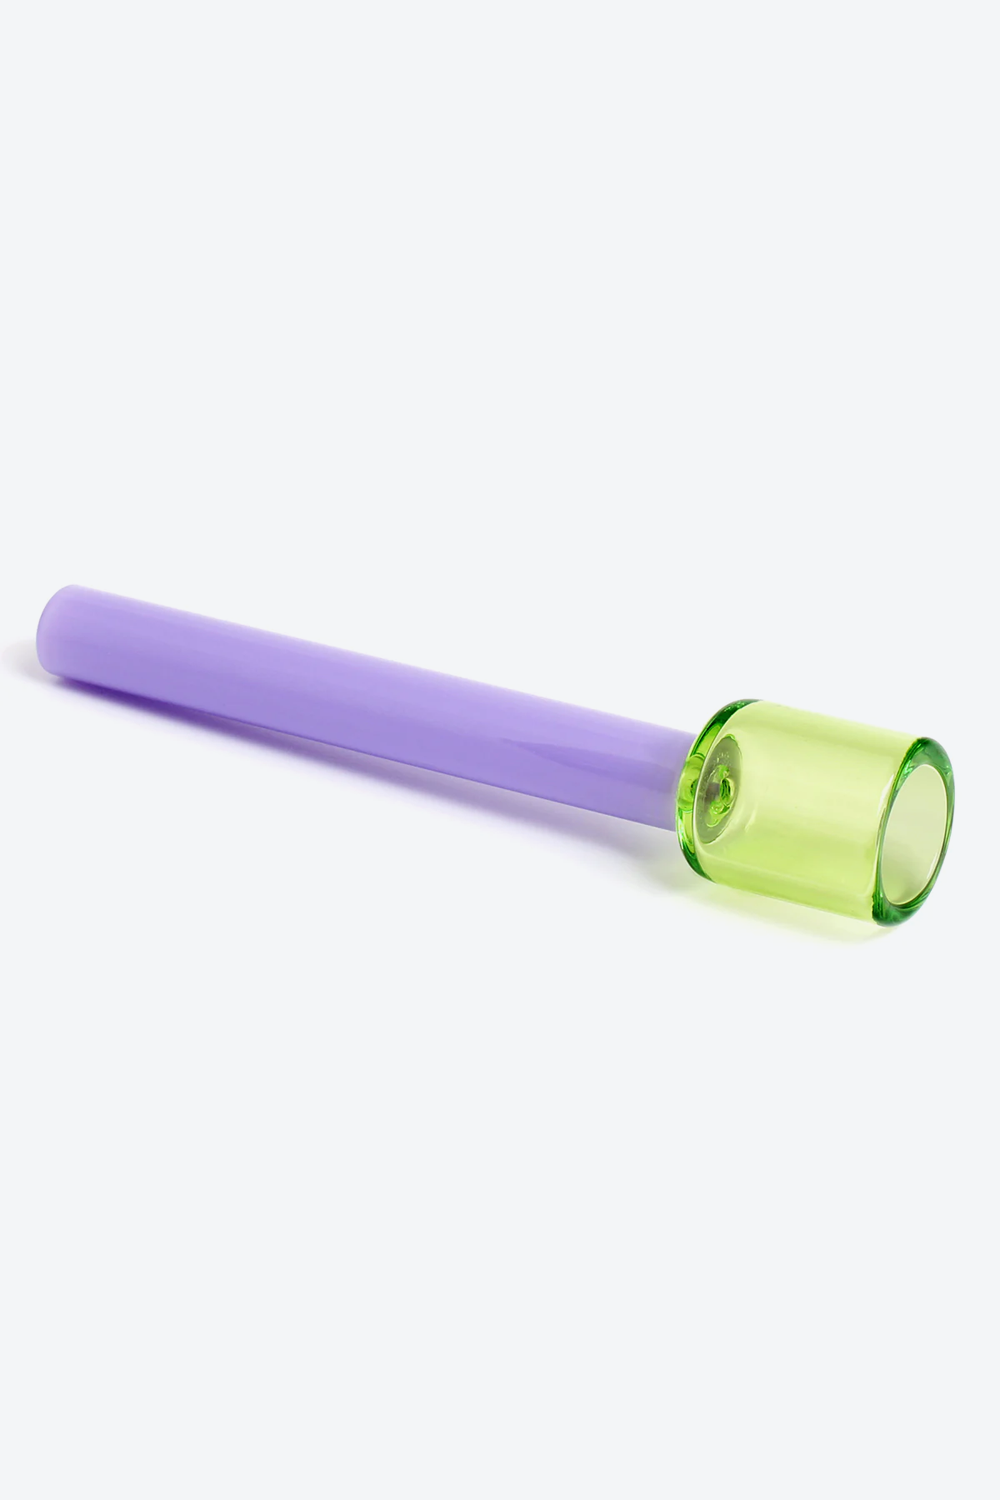 Duo Pipe by Tetra